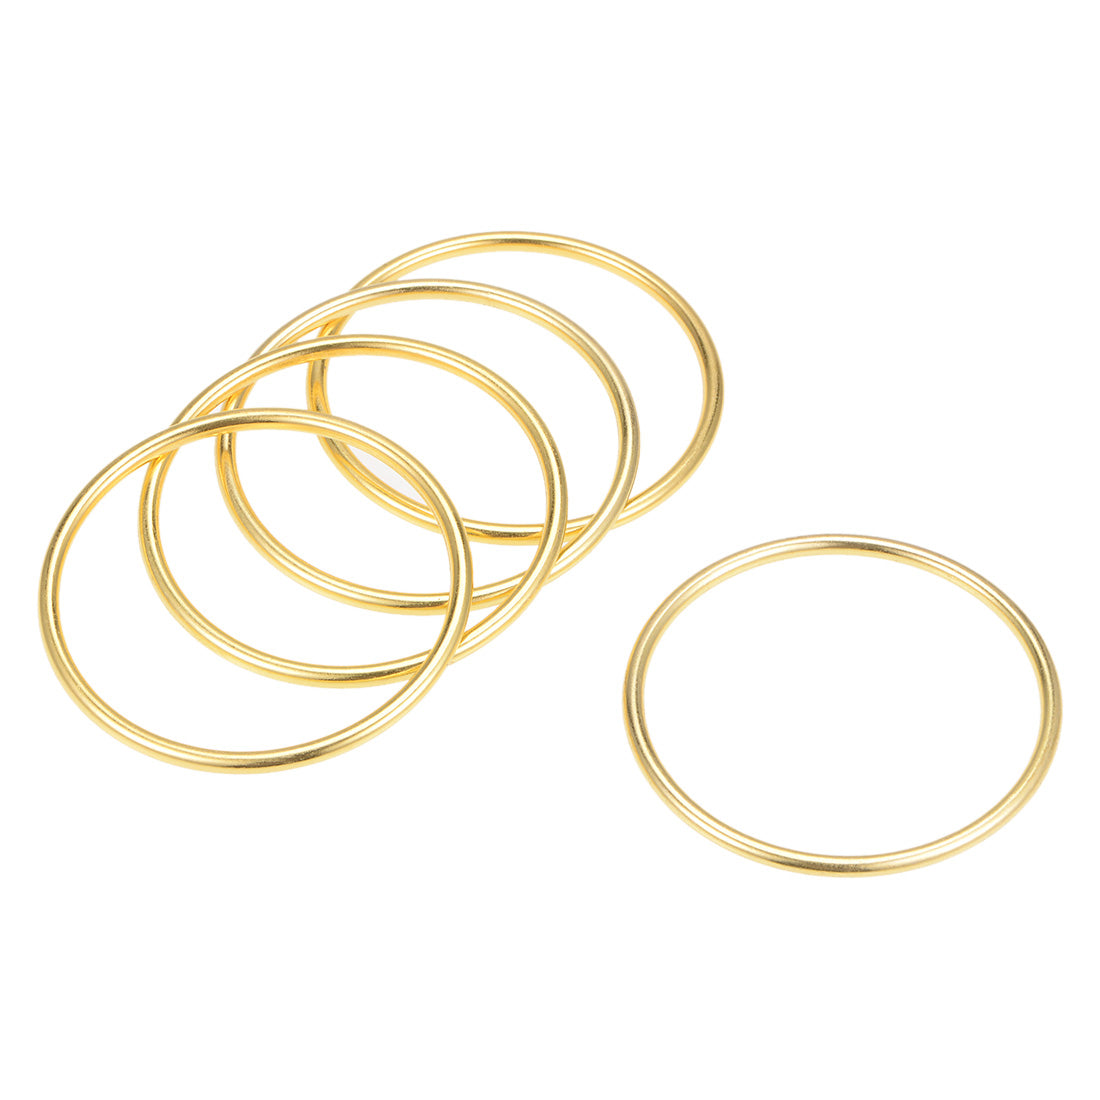 uxcell Uxcell O Ring Buckle 50mm(2") ID 3mm Thickness Zinc Alloy O-Rings for Hardware Bags Belts Craft DIY Accessories, Gold Tone 5pcs